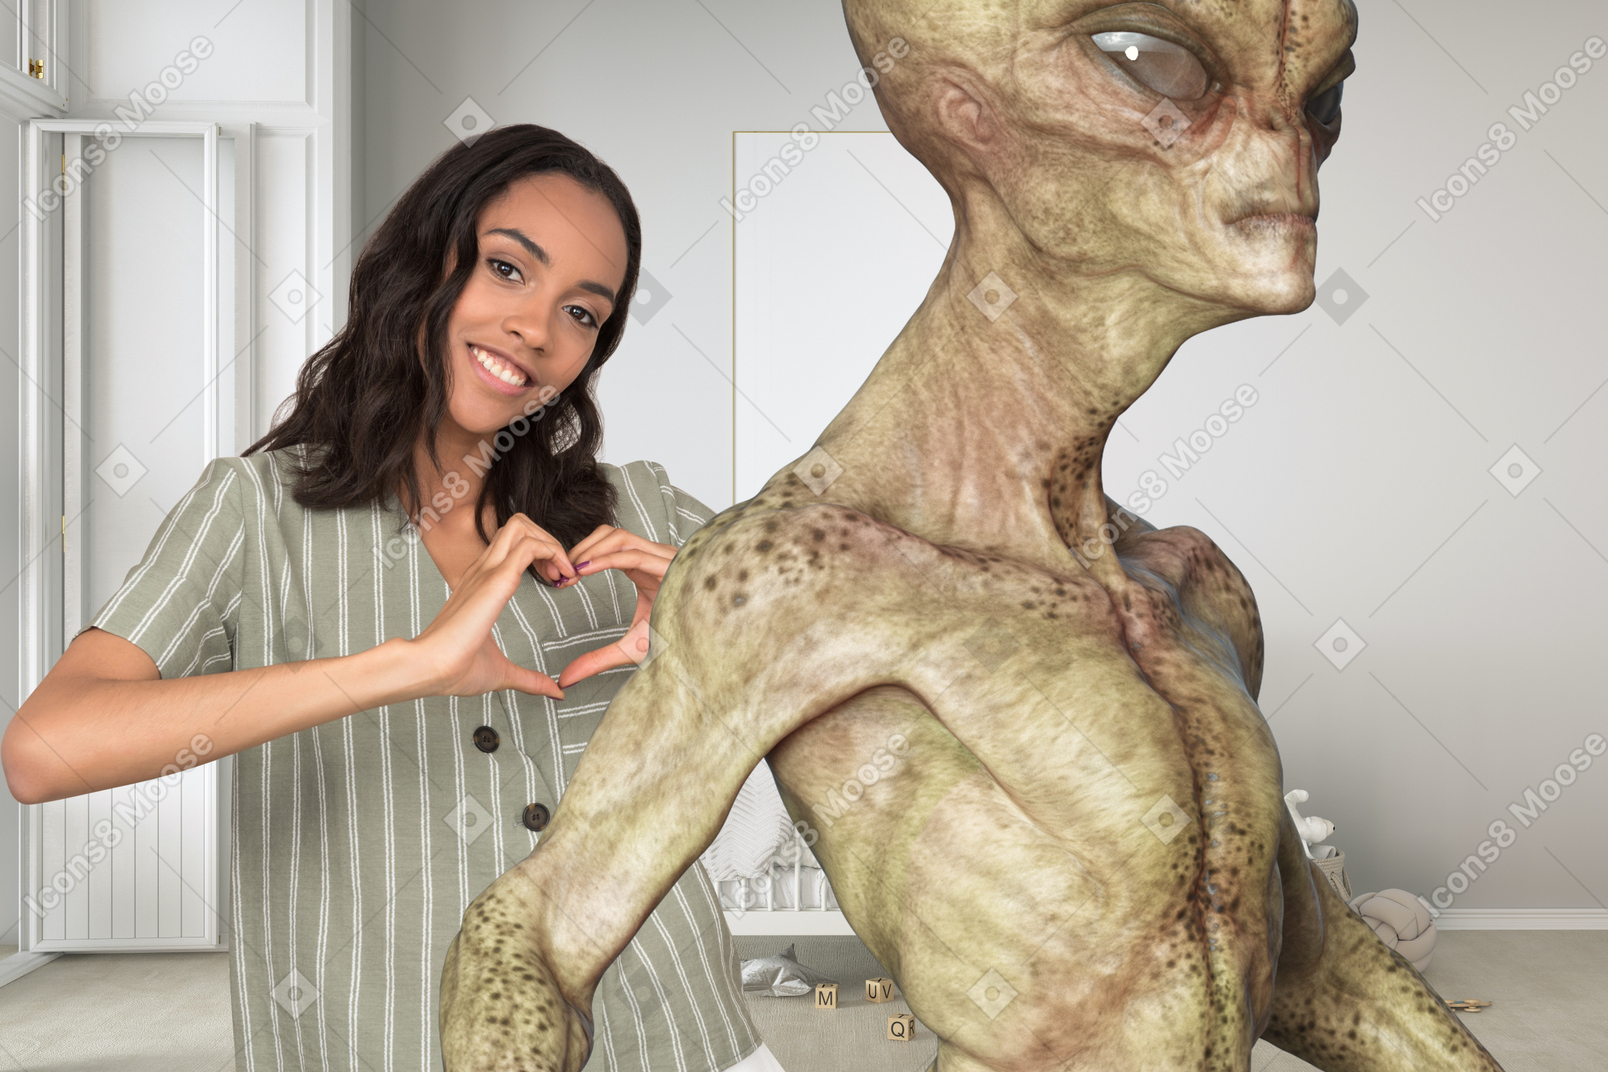 A woman standing next to a fake alien